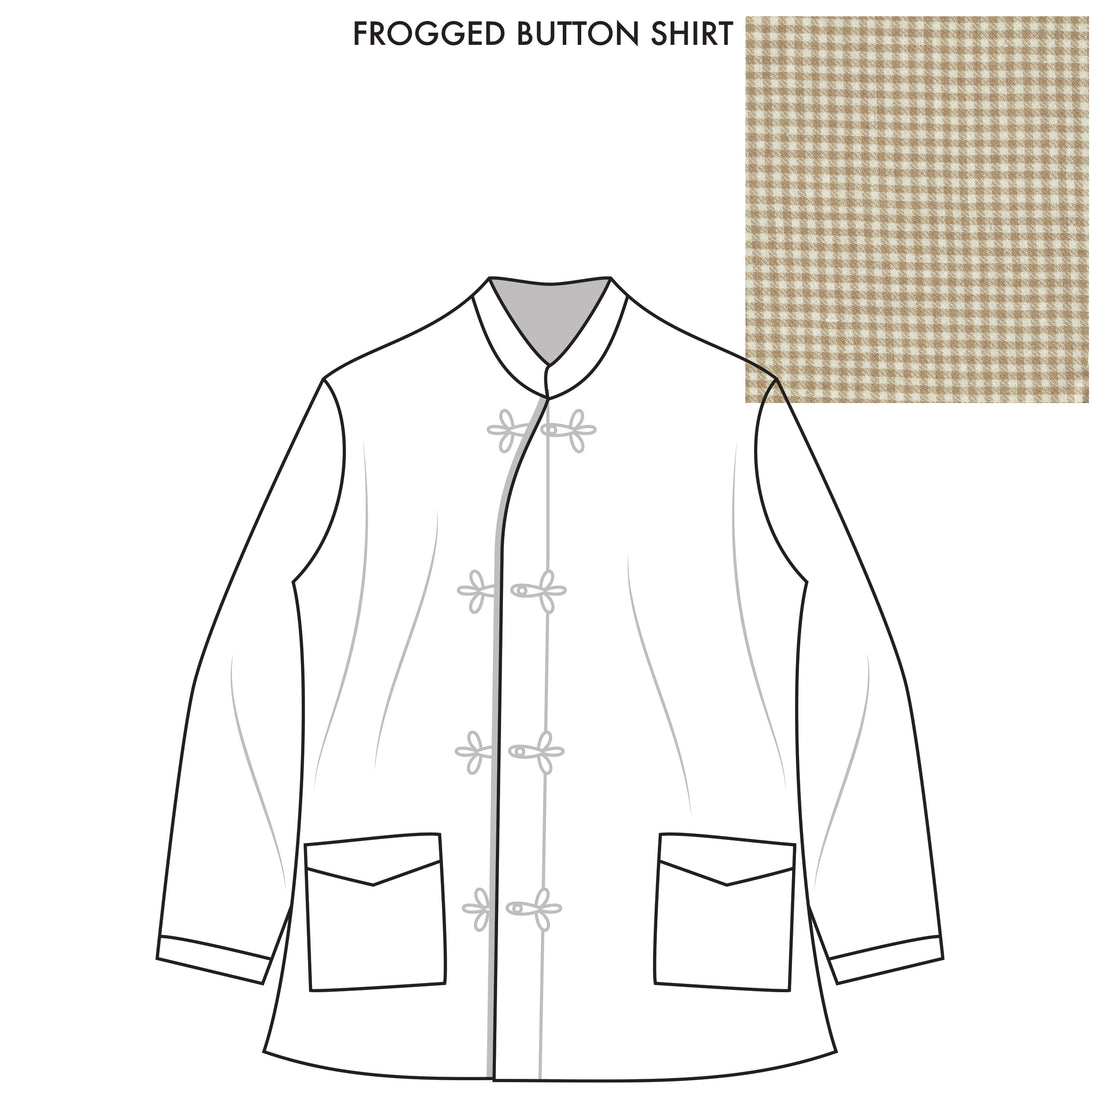 Bryceland’s Frogged Button Shirt Made-to-order Tan Puppytooth